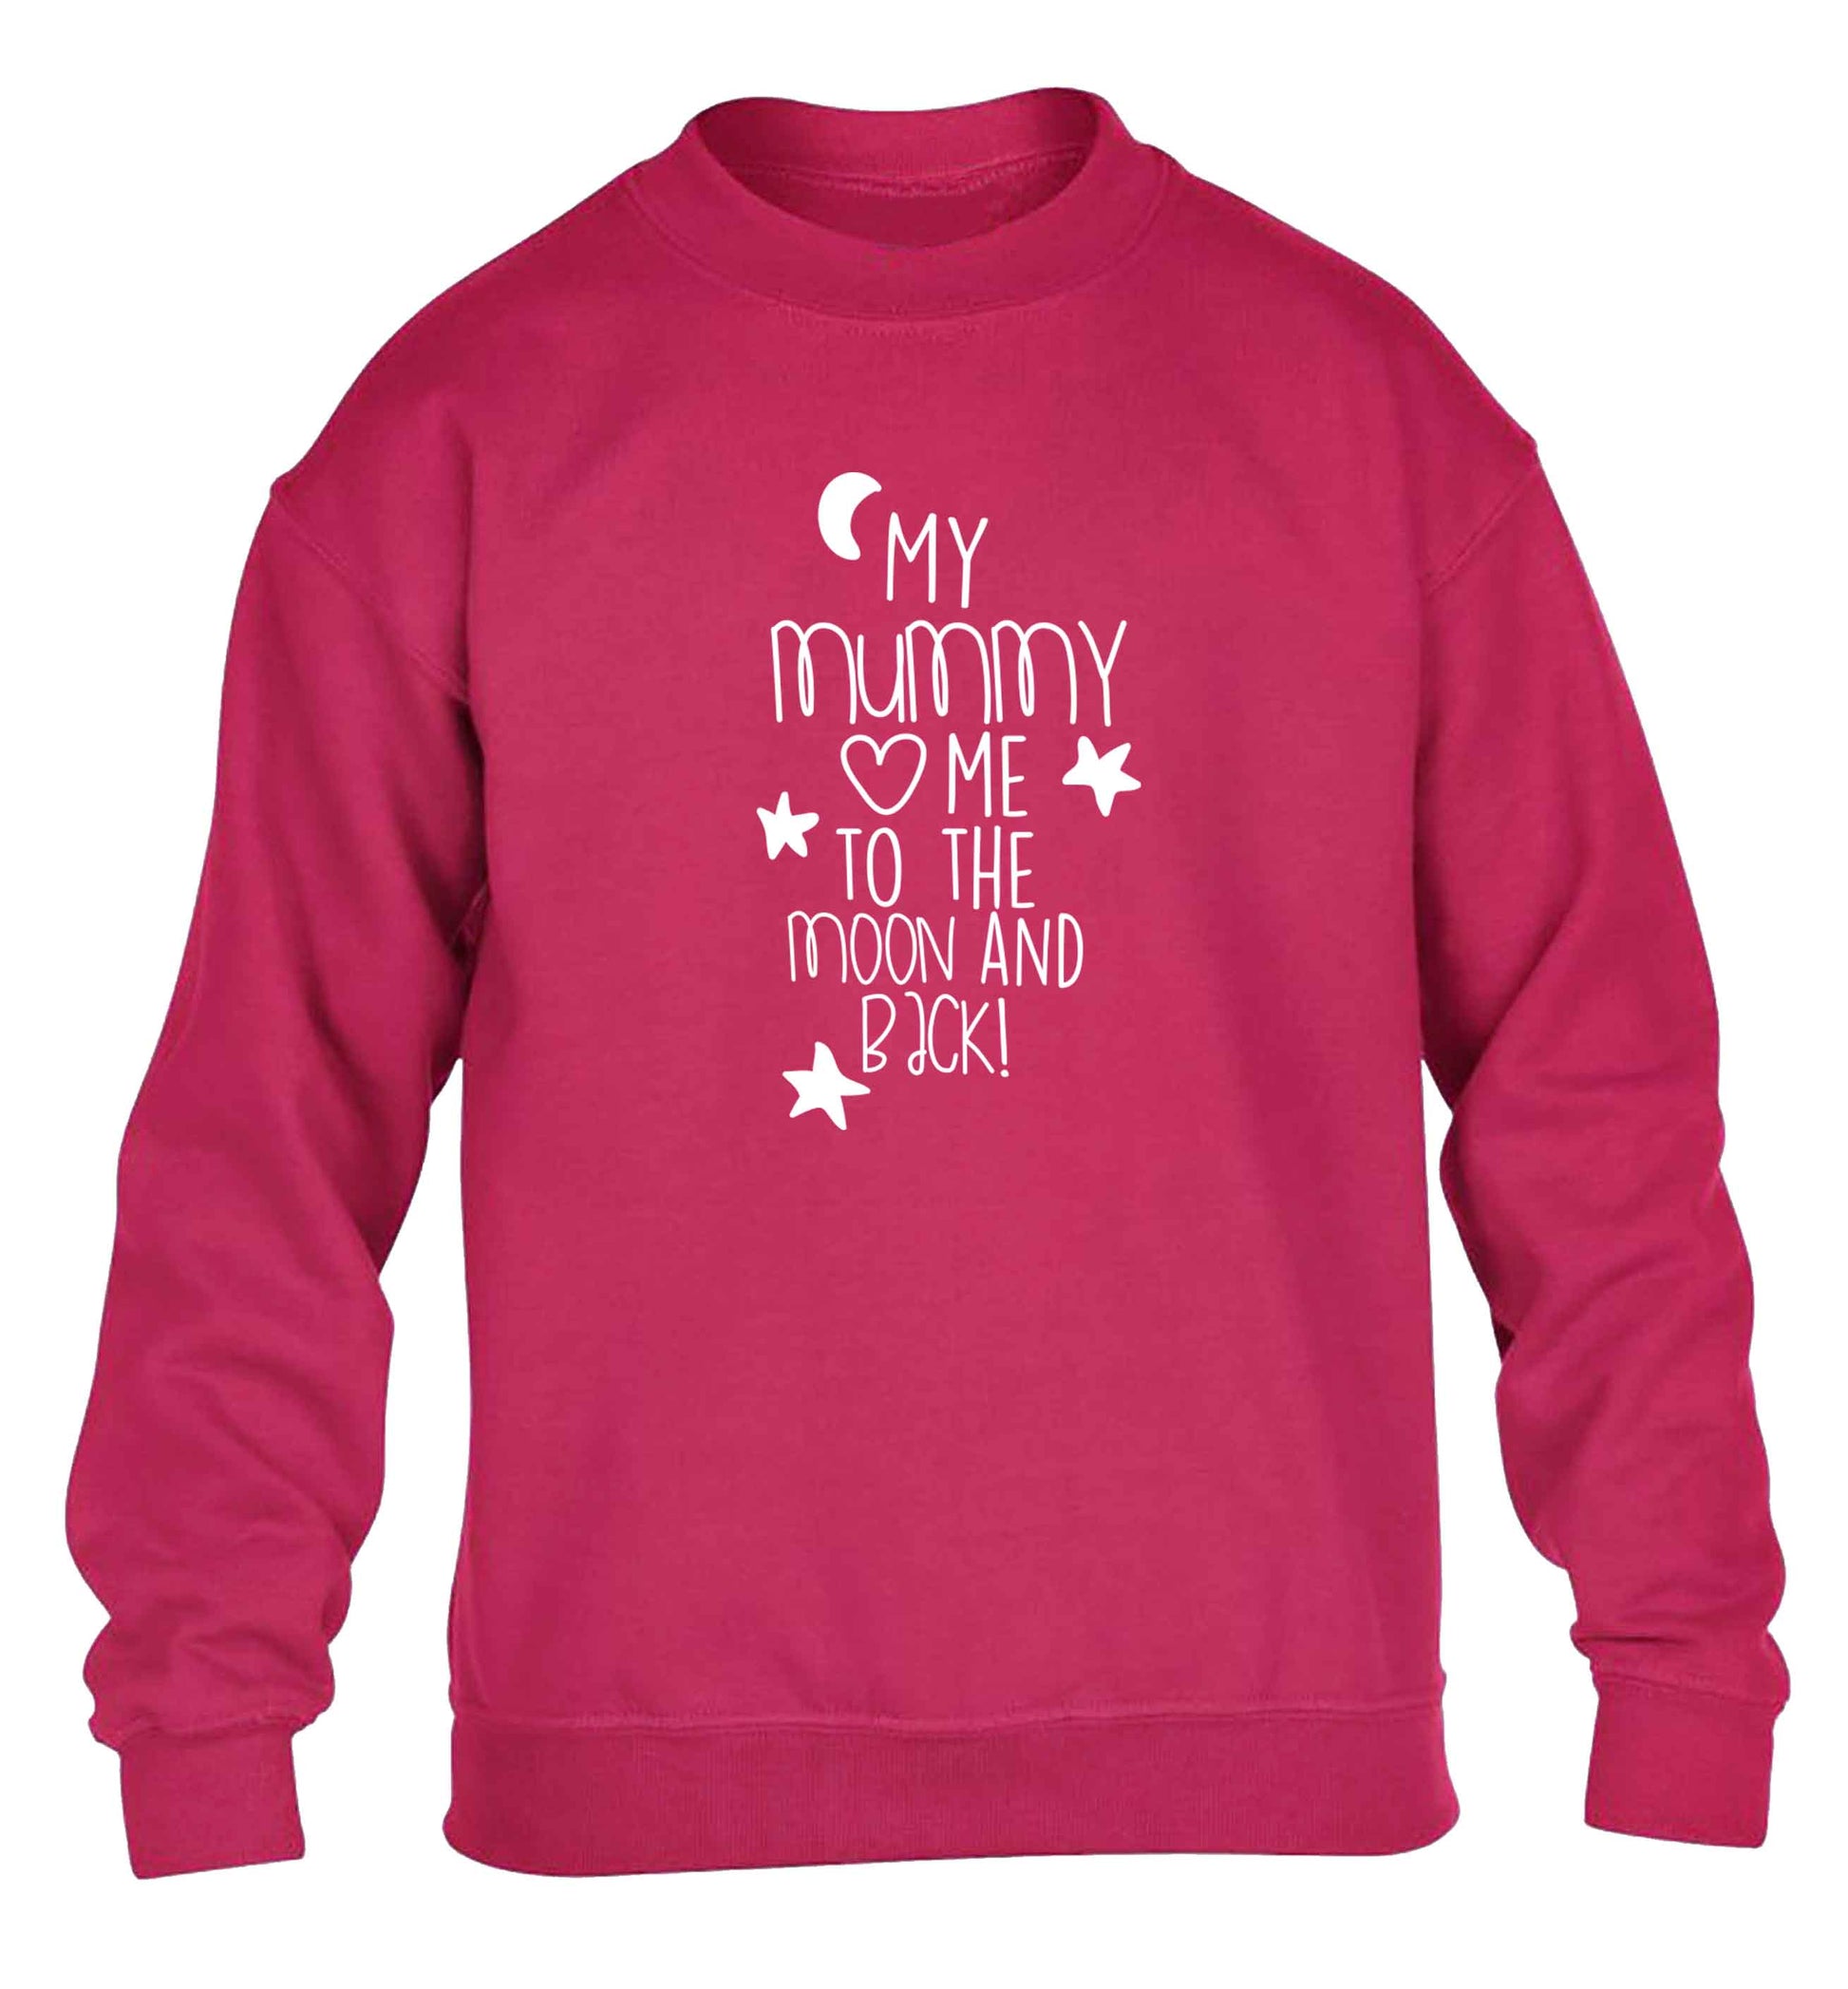 My mum loves me to the moon and back children's pink sweater 12-13 Years